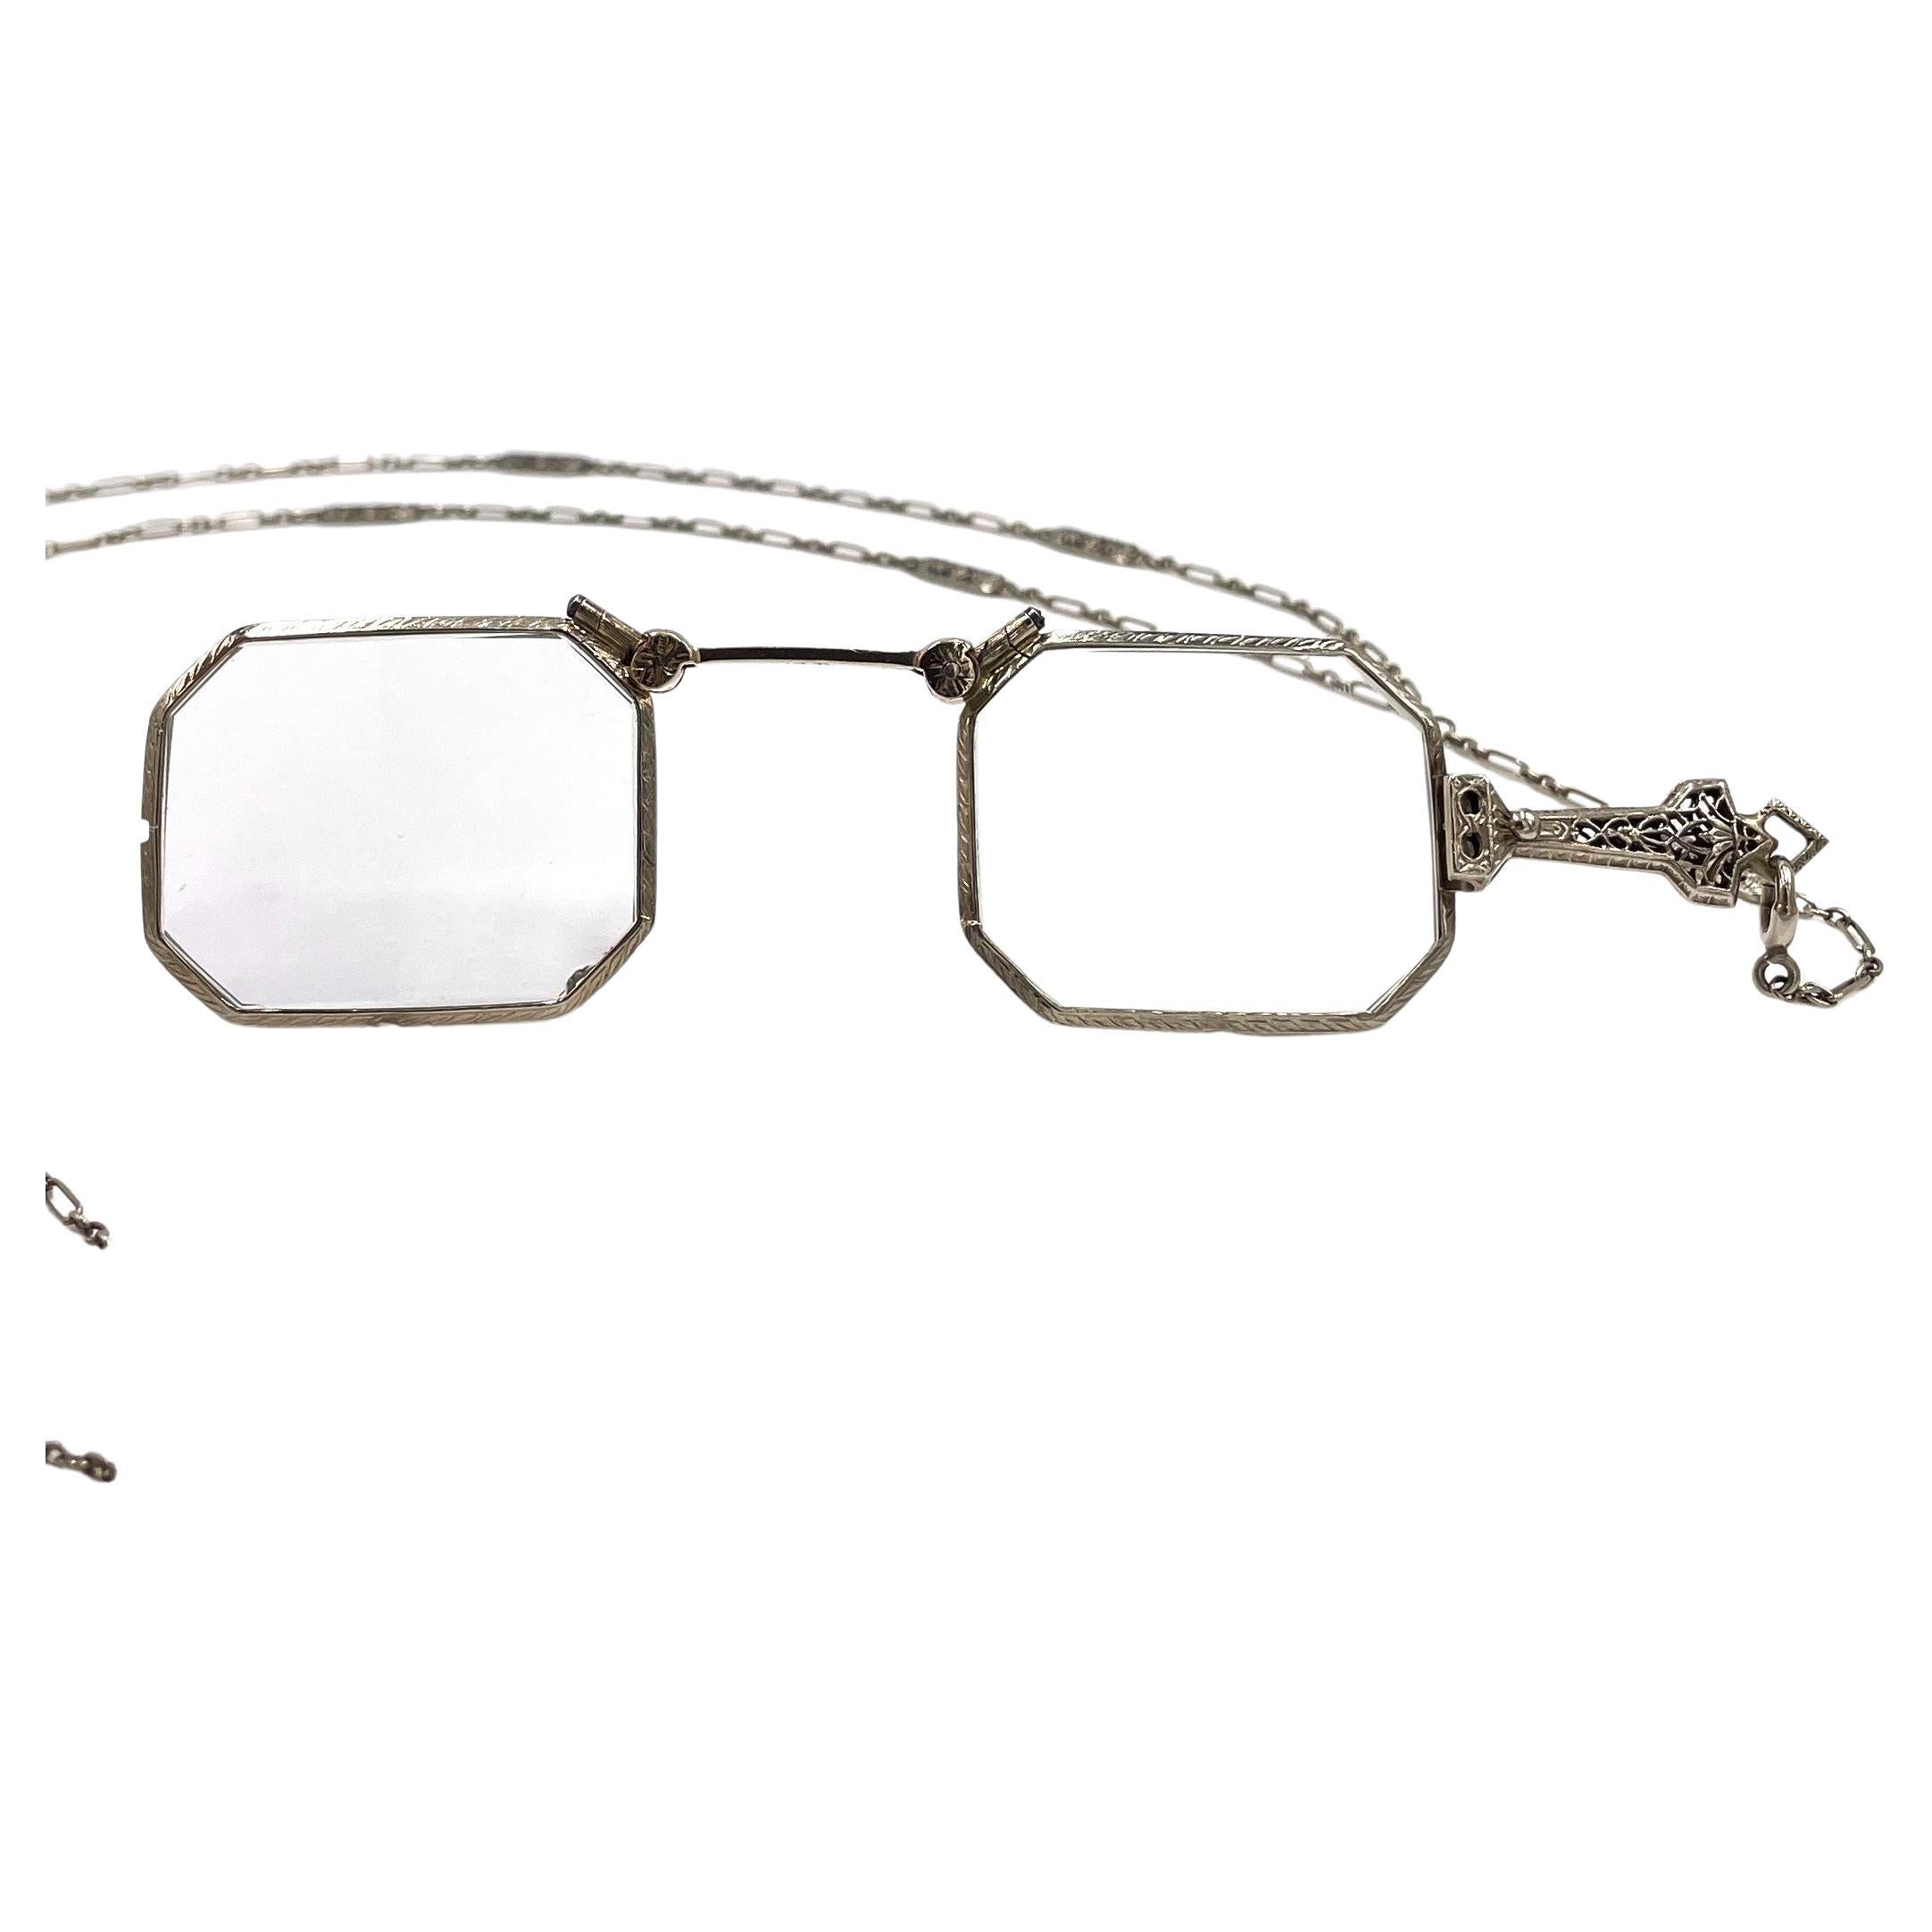 19th Century Antique Victorian folding lorgnette eye glasses.
The lenses are encased in 14k white gold and is hand engraved.  It has a handle and comes with a removable 14k white gold chain larriate.  The 14K white gold fancy square link chain is 30